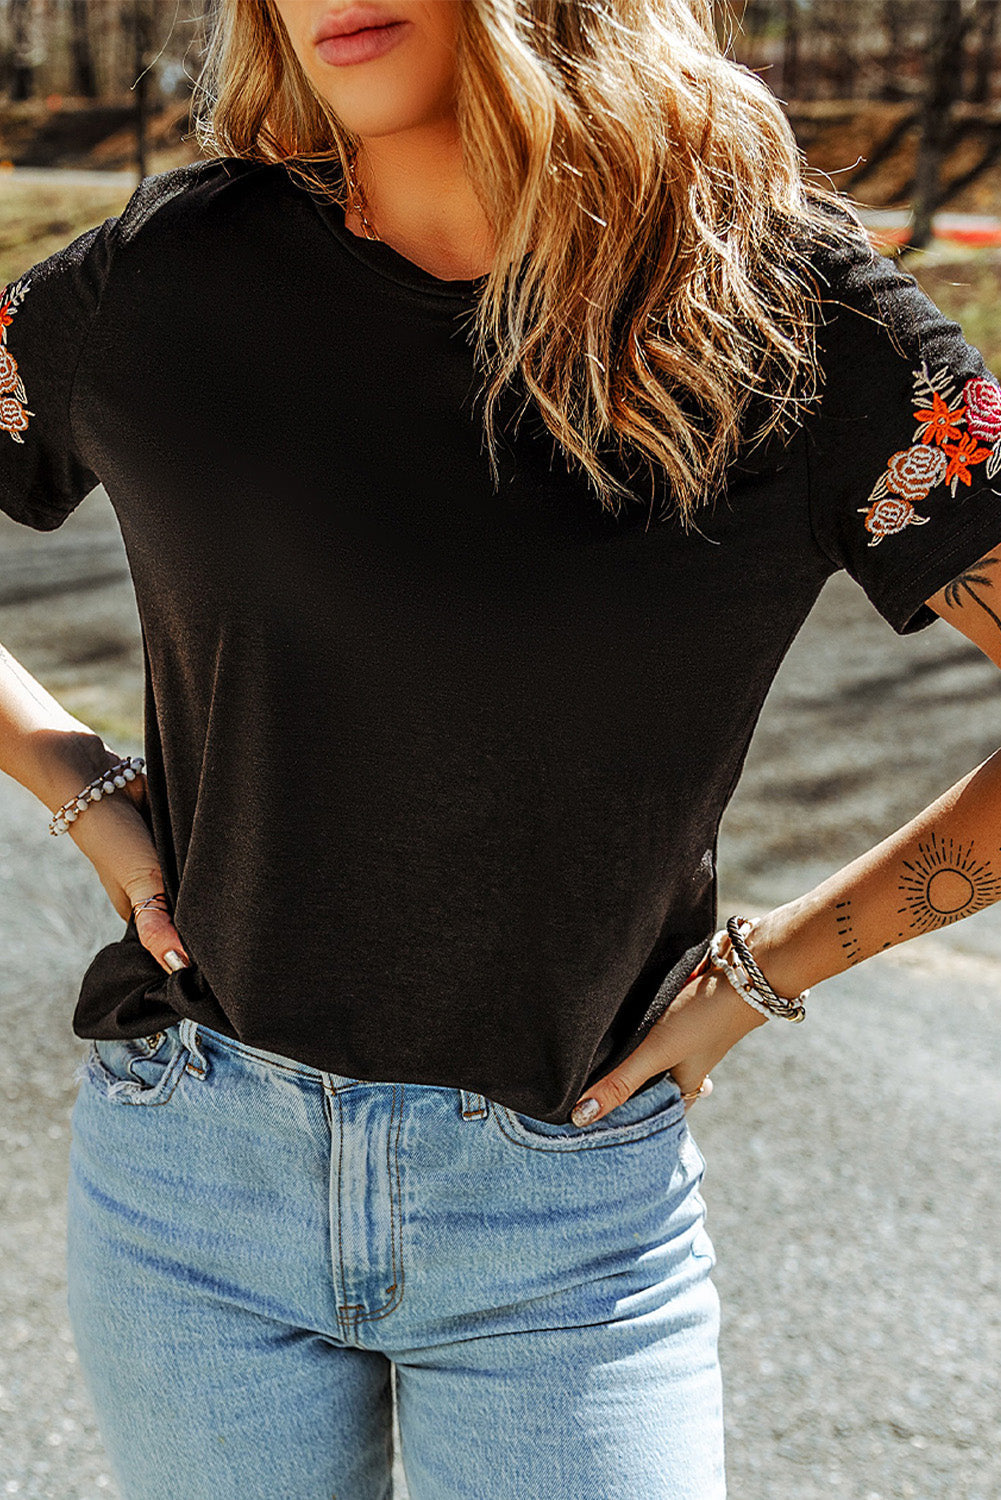 Floral Embroidered Round Neck Short Sleeve T Shirt